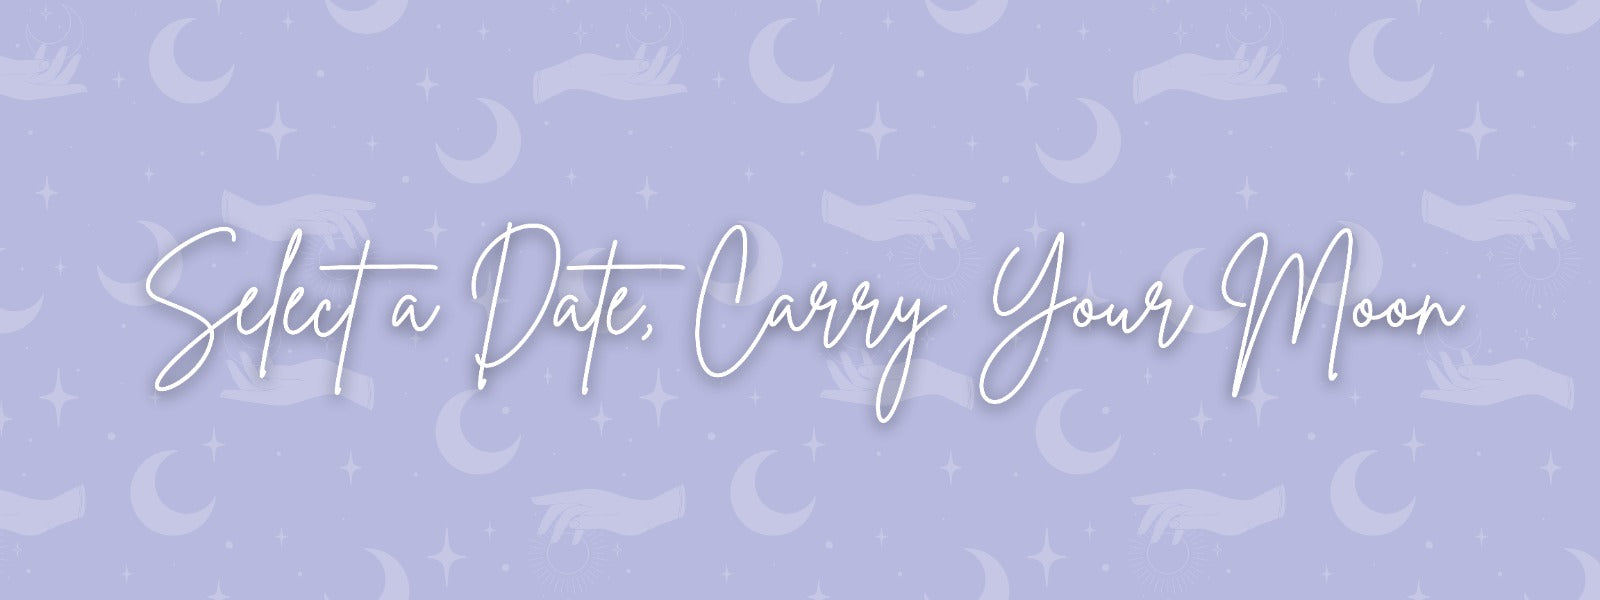 Select a Date and Carry your Moon